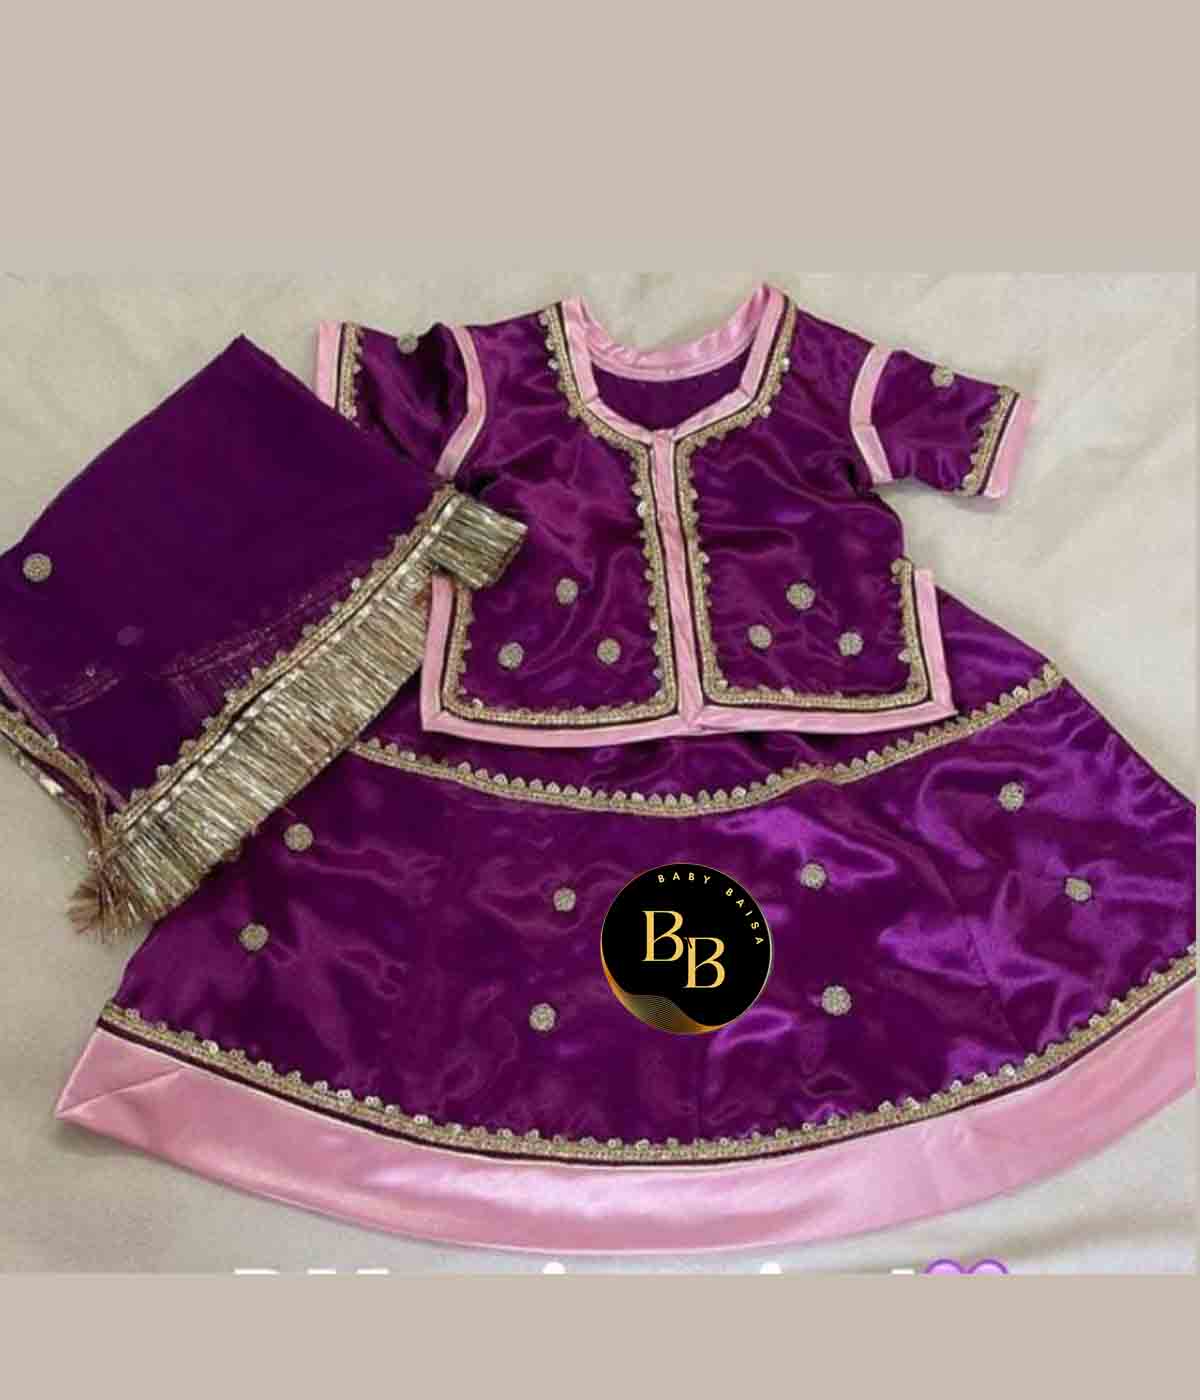 Girls Rajupti Poshak in Purple and PInk Color With Stitching